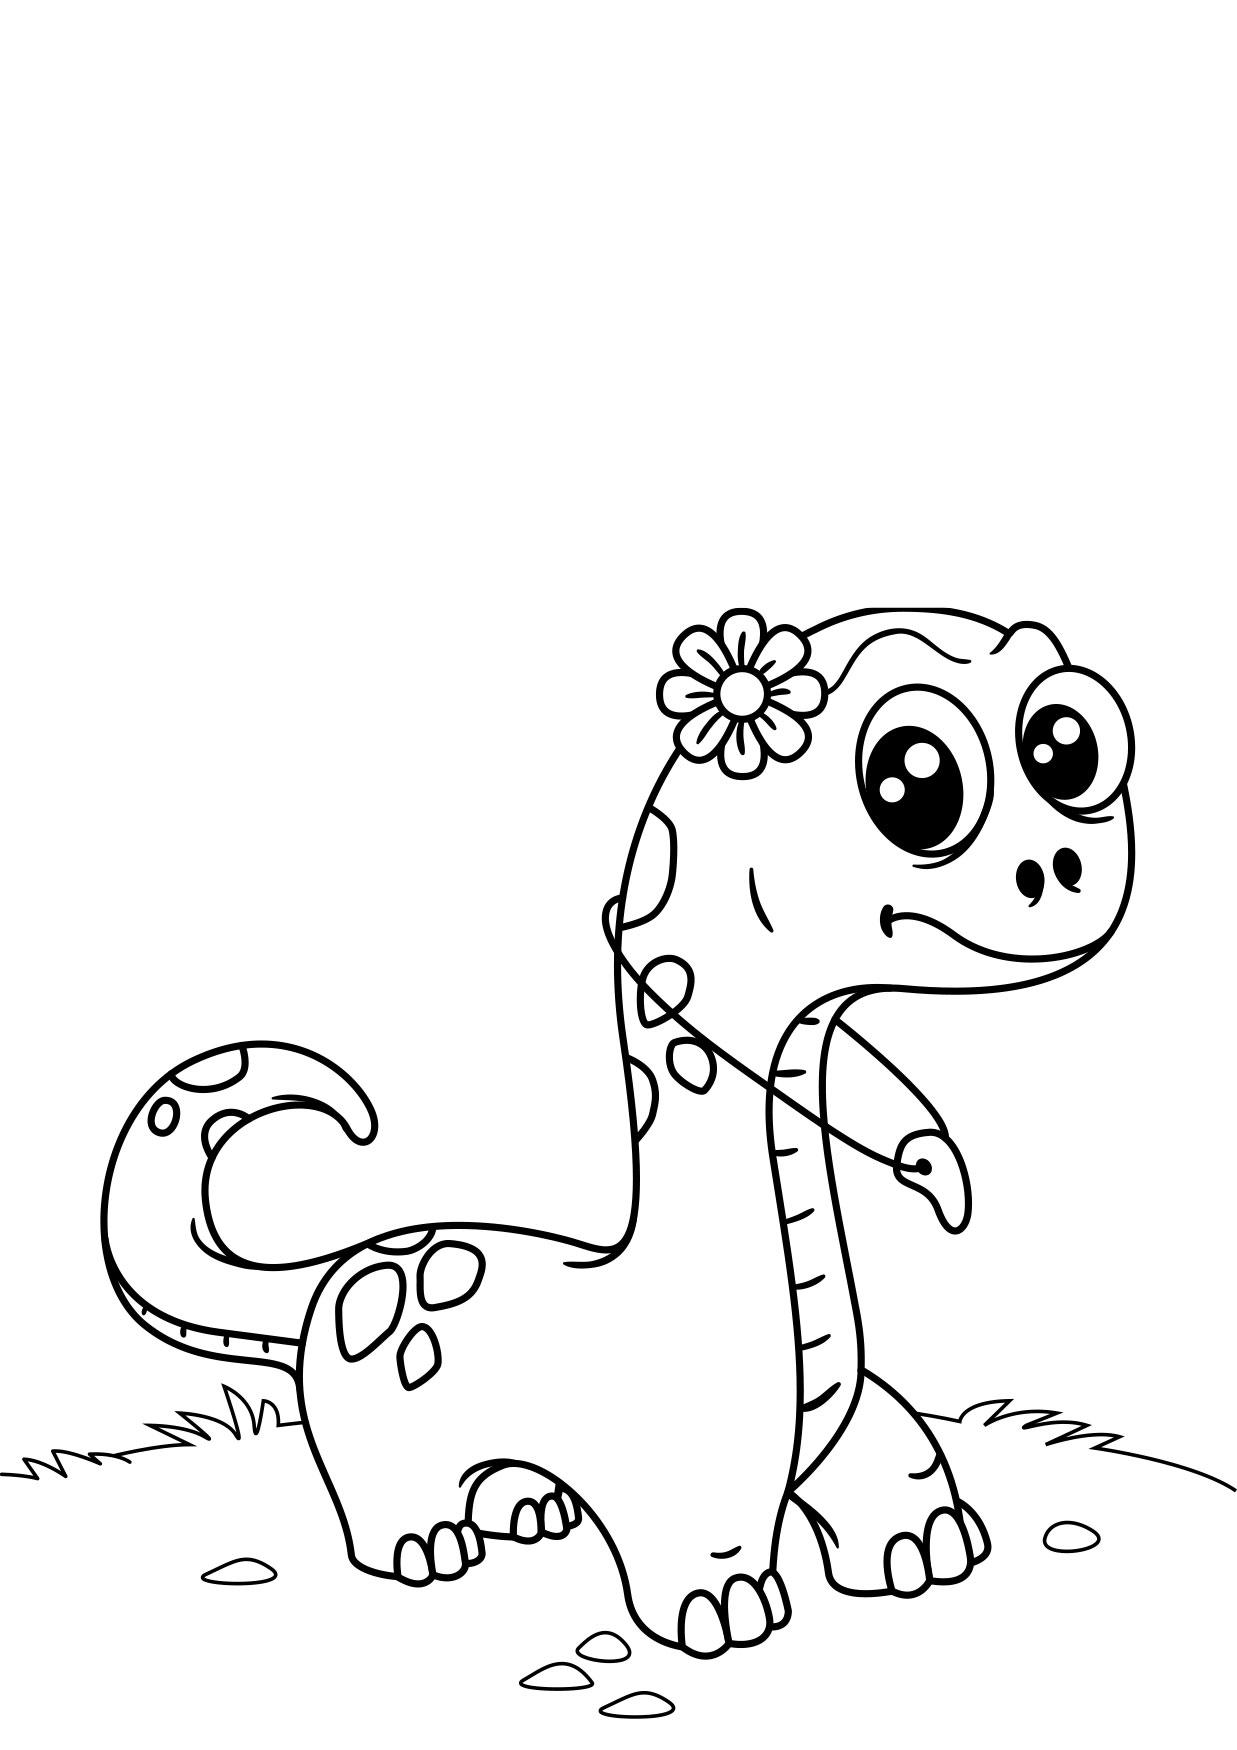 Coloring page dinosaur with flower